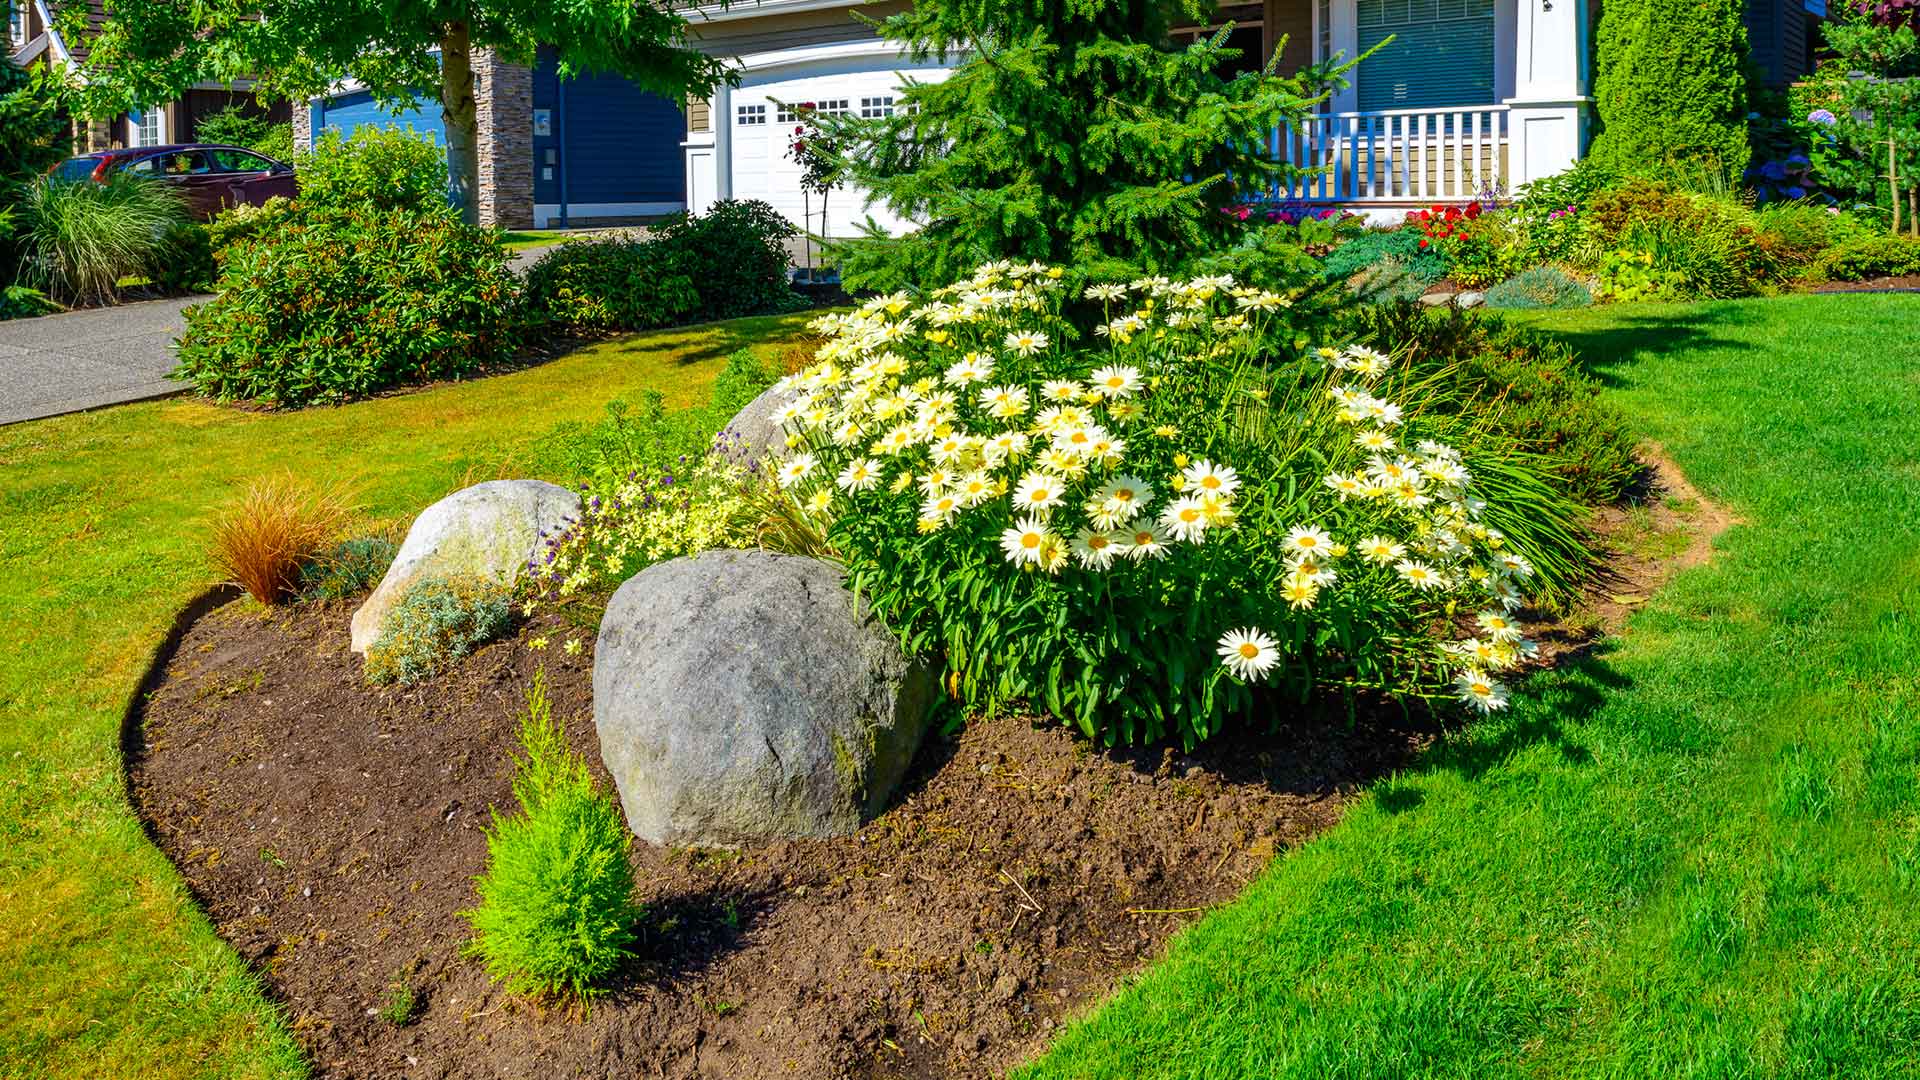 A Low-Maintenance, Stunning Landscape Doesn't Have to Be an Oxymoron